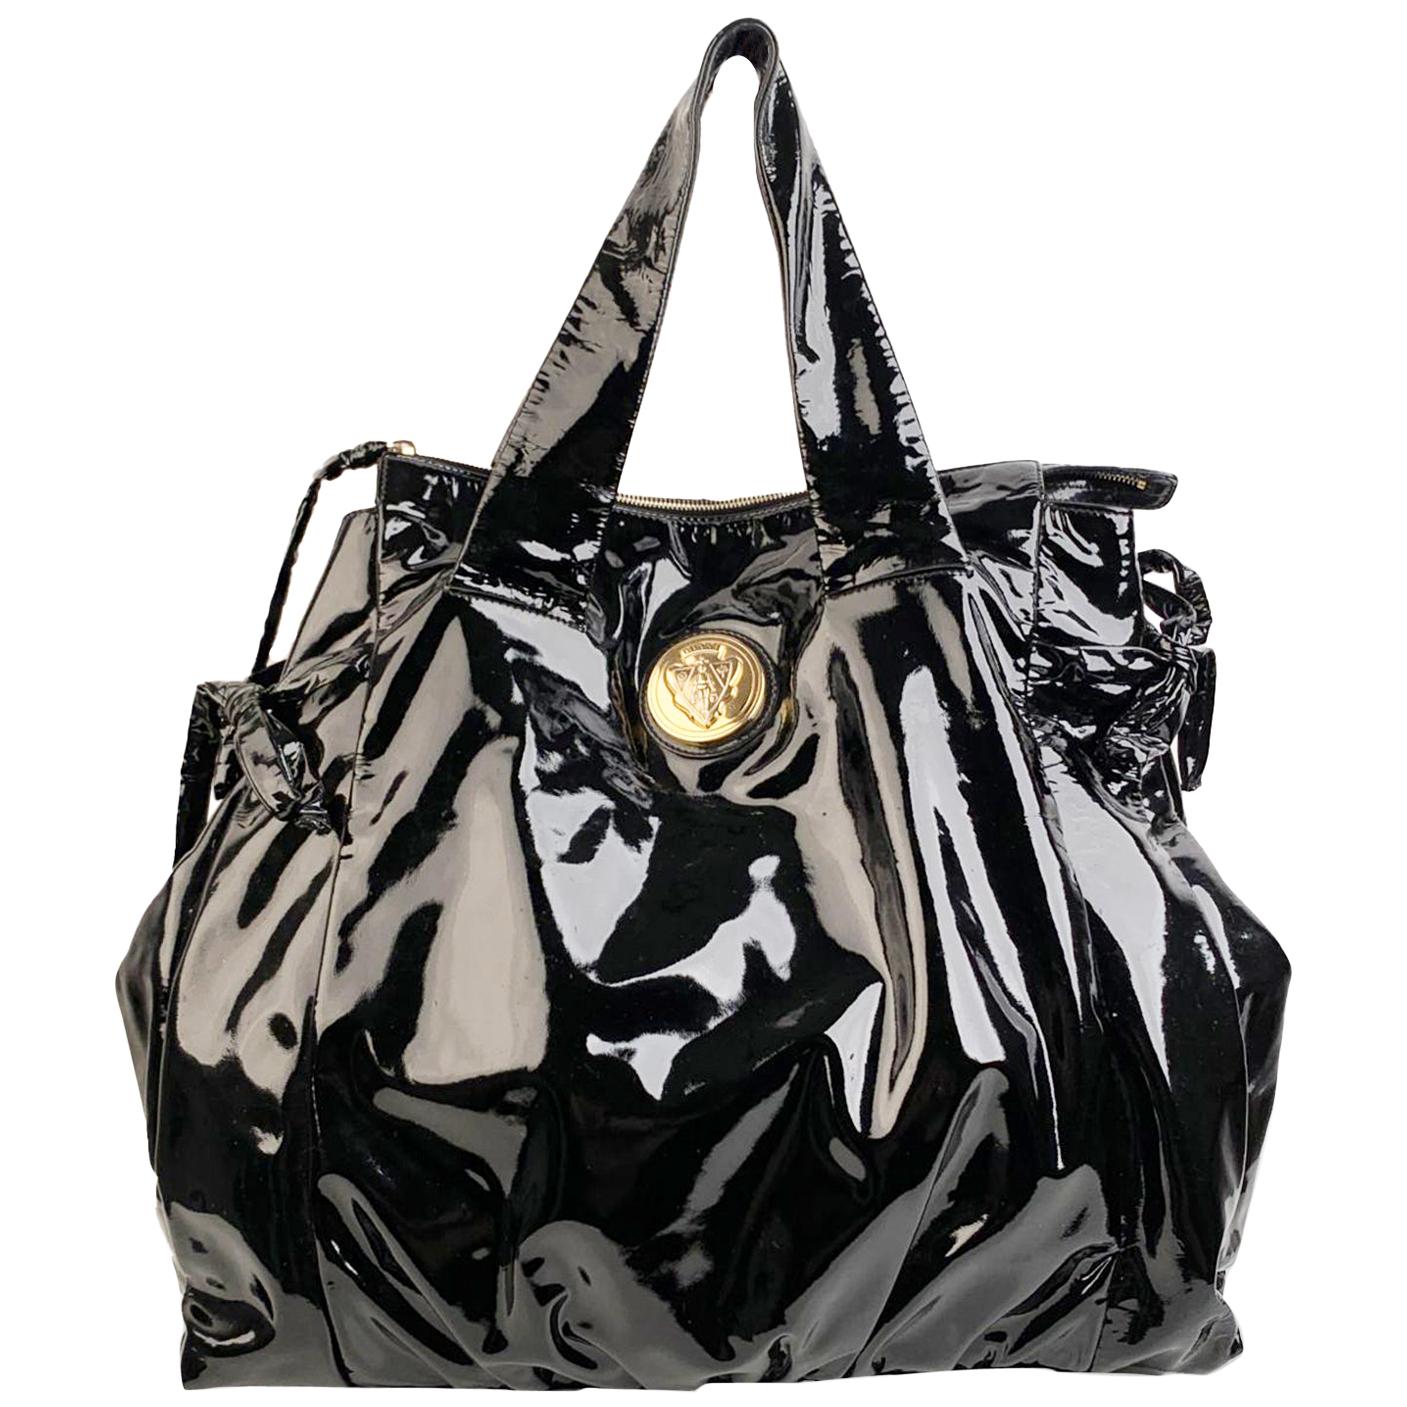 Gucci Black Patent Leather Hysteria Large Tote Shopping Bag